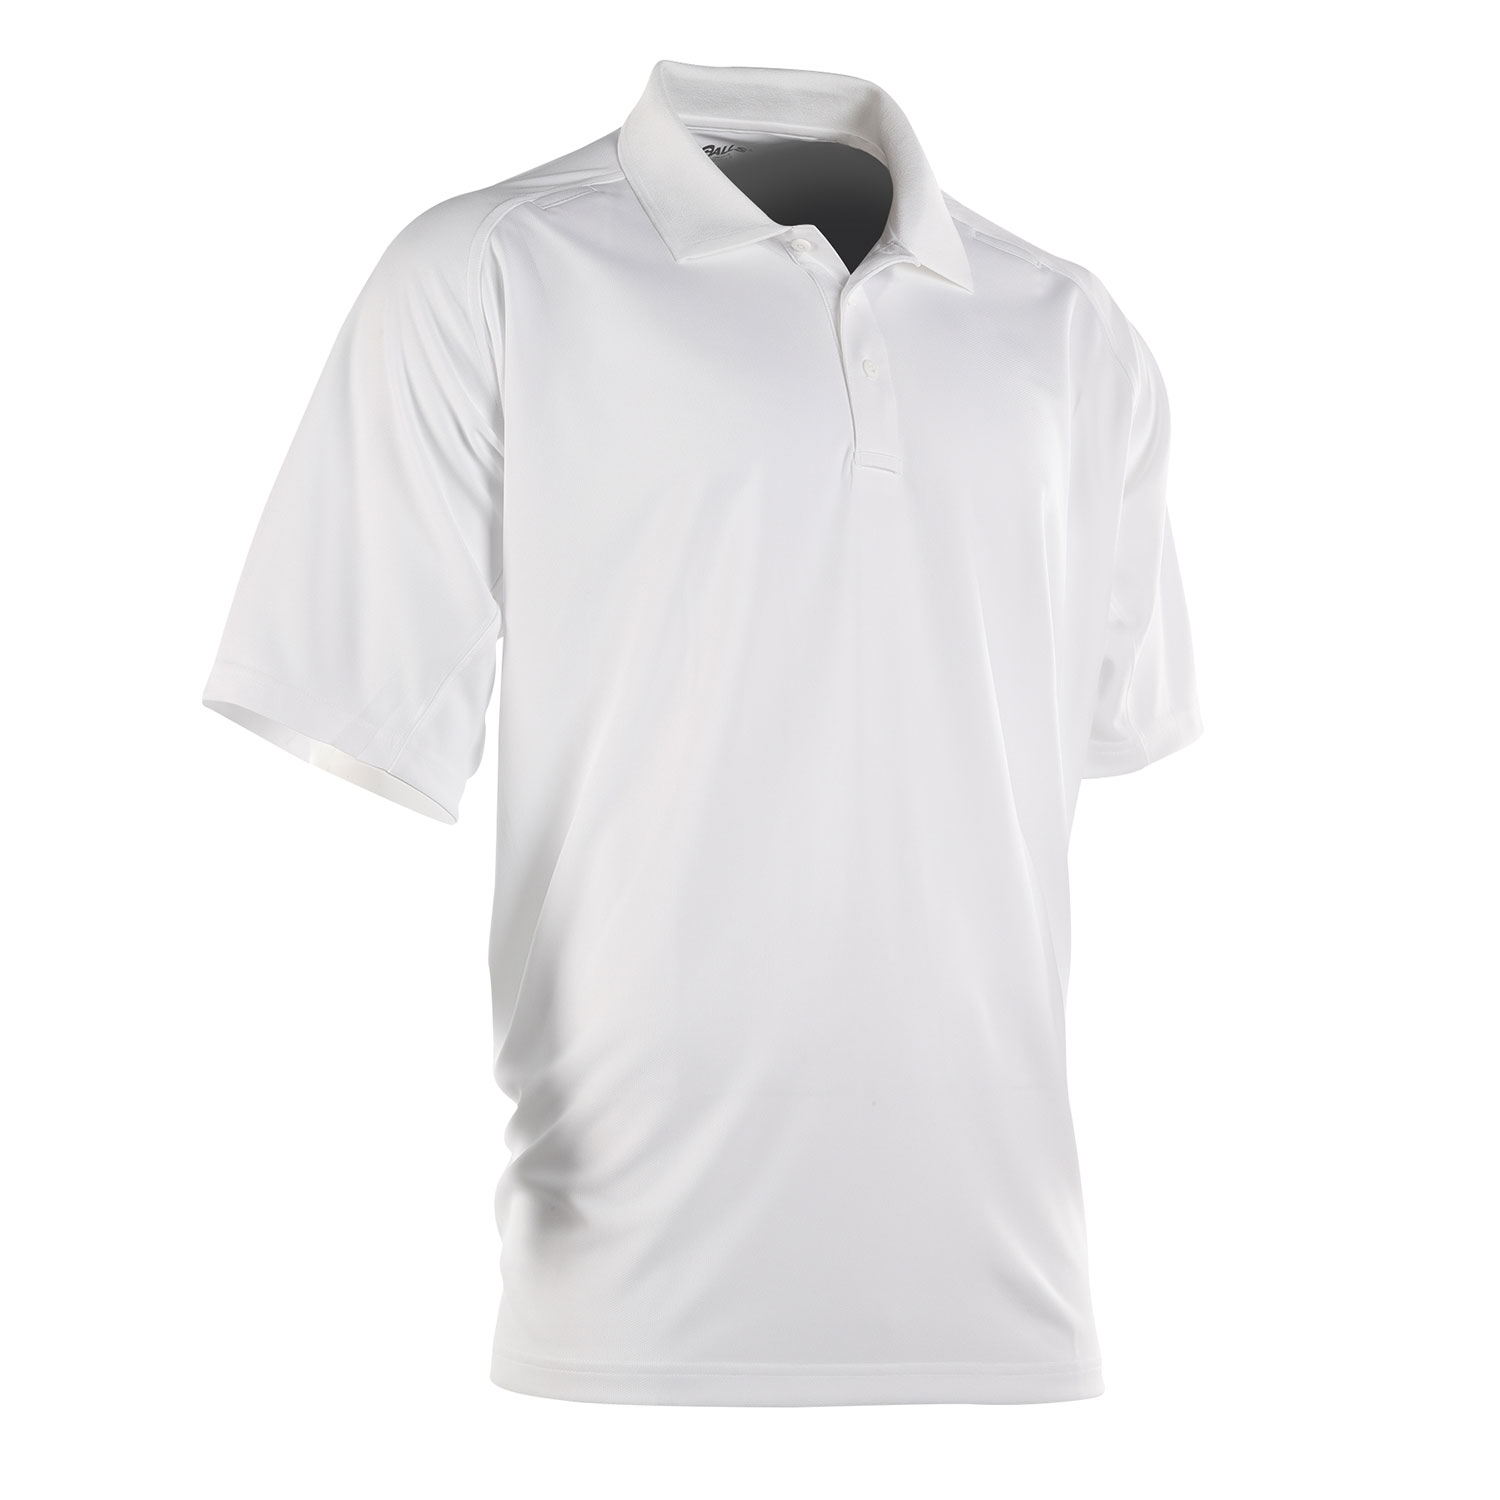 Galls Tac Force Lightweight Polo